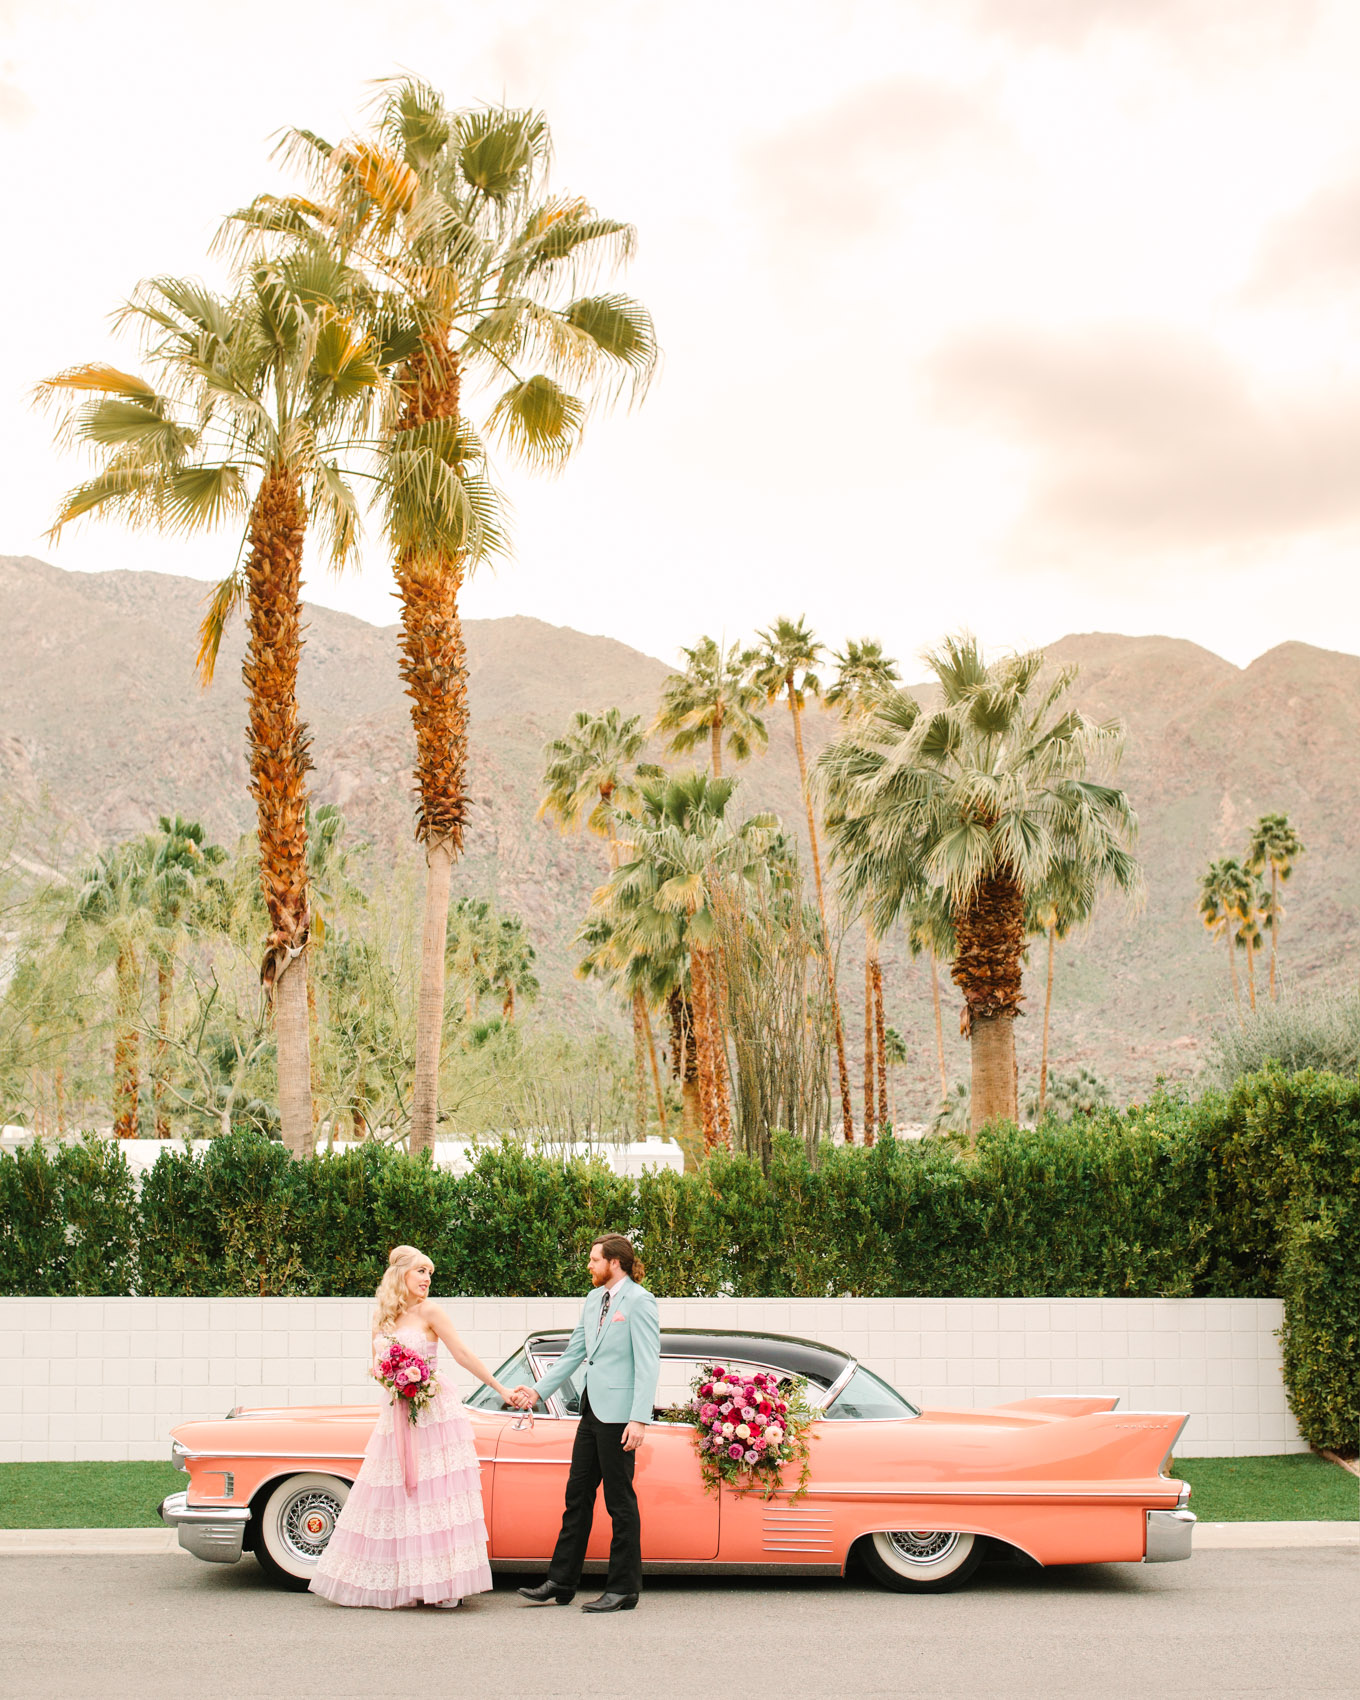 Modern vintage-inspired Palm Springs engagement session with a 1960s pink Cadillac car, retro clothing, and flowers by Shindig Chic. | Colorful and elevated wedding inspiration for fun-loving couples in Southern California | #engagementsession #PalmSpringsengagement #vintageweddingdress #floralcar #pinkcar   Source: Mary Costa Photography | Los Angeles